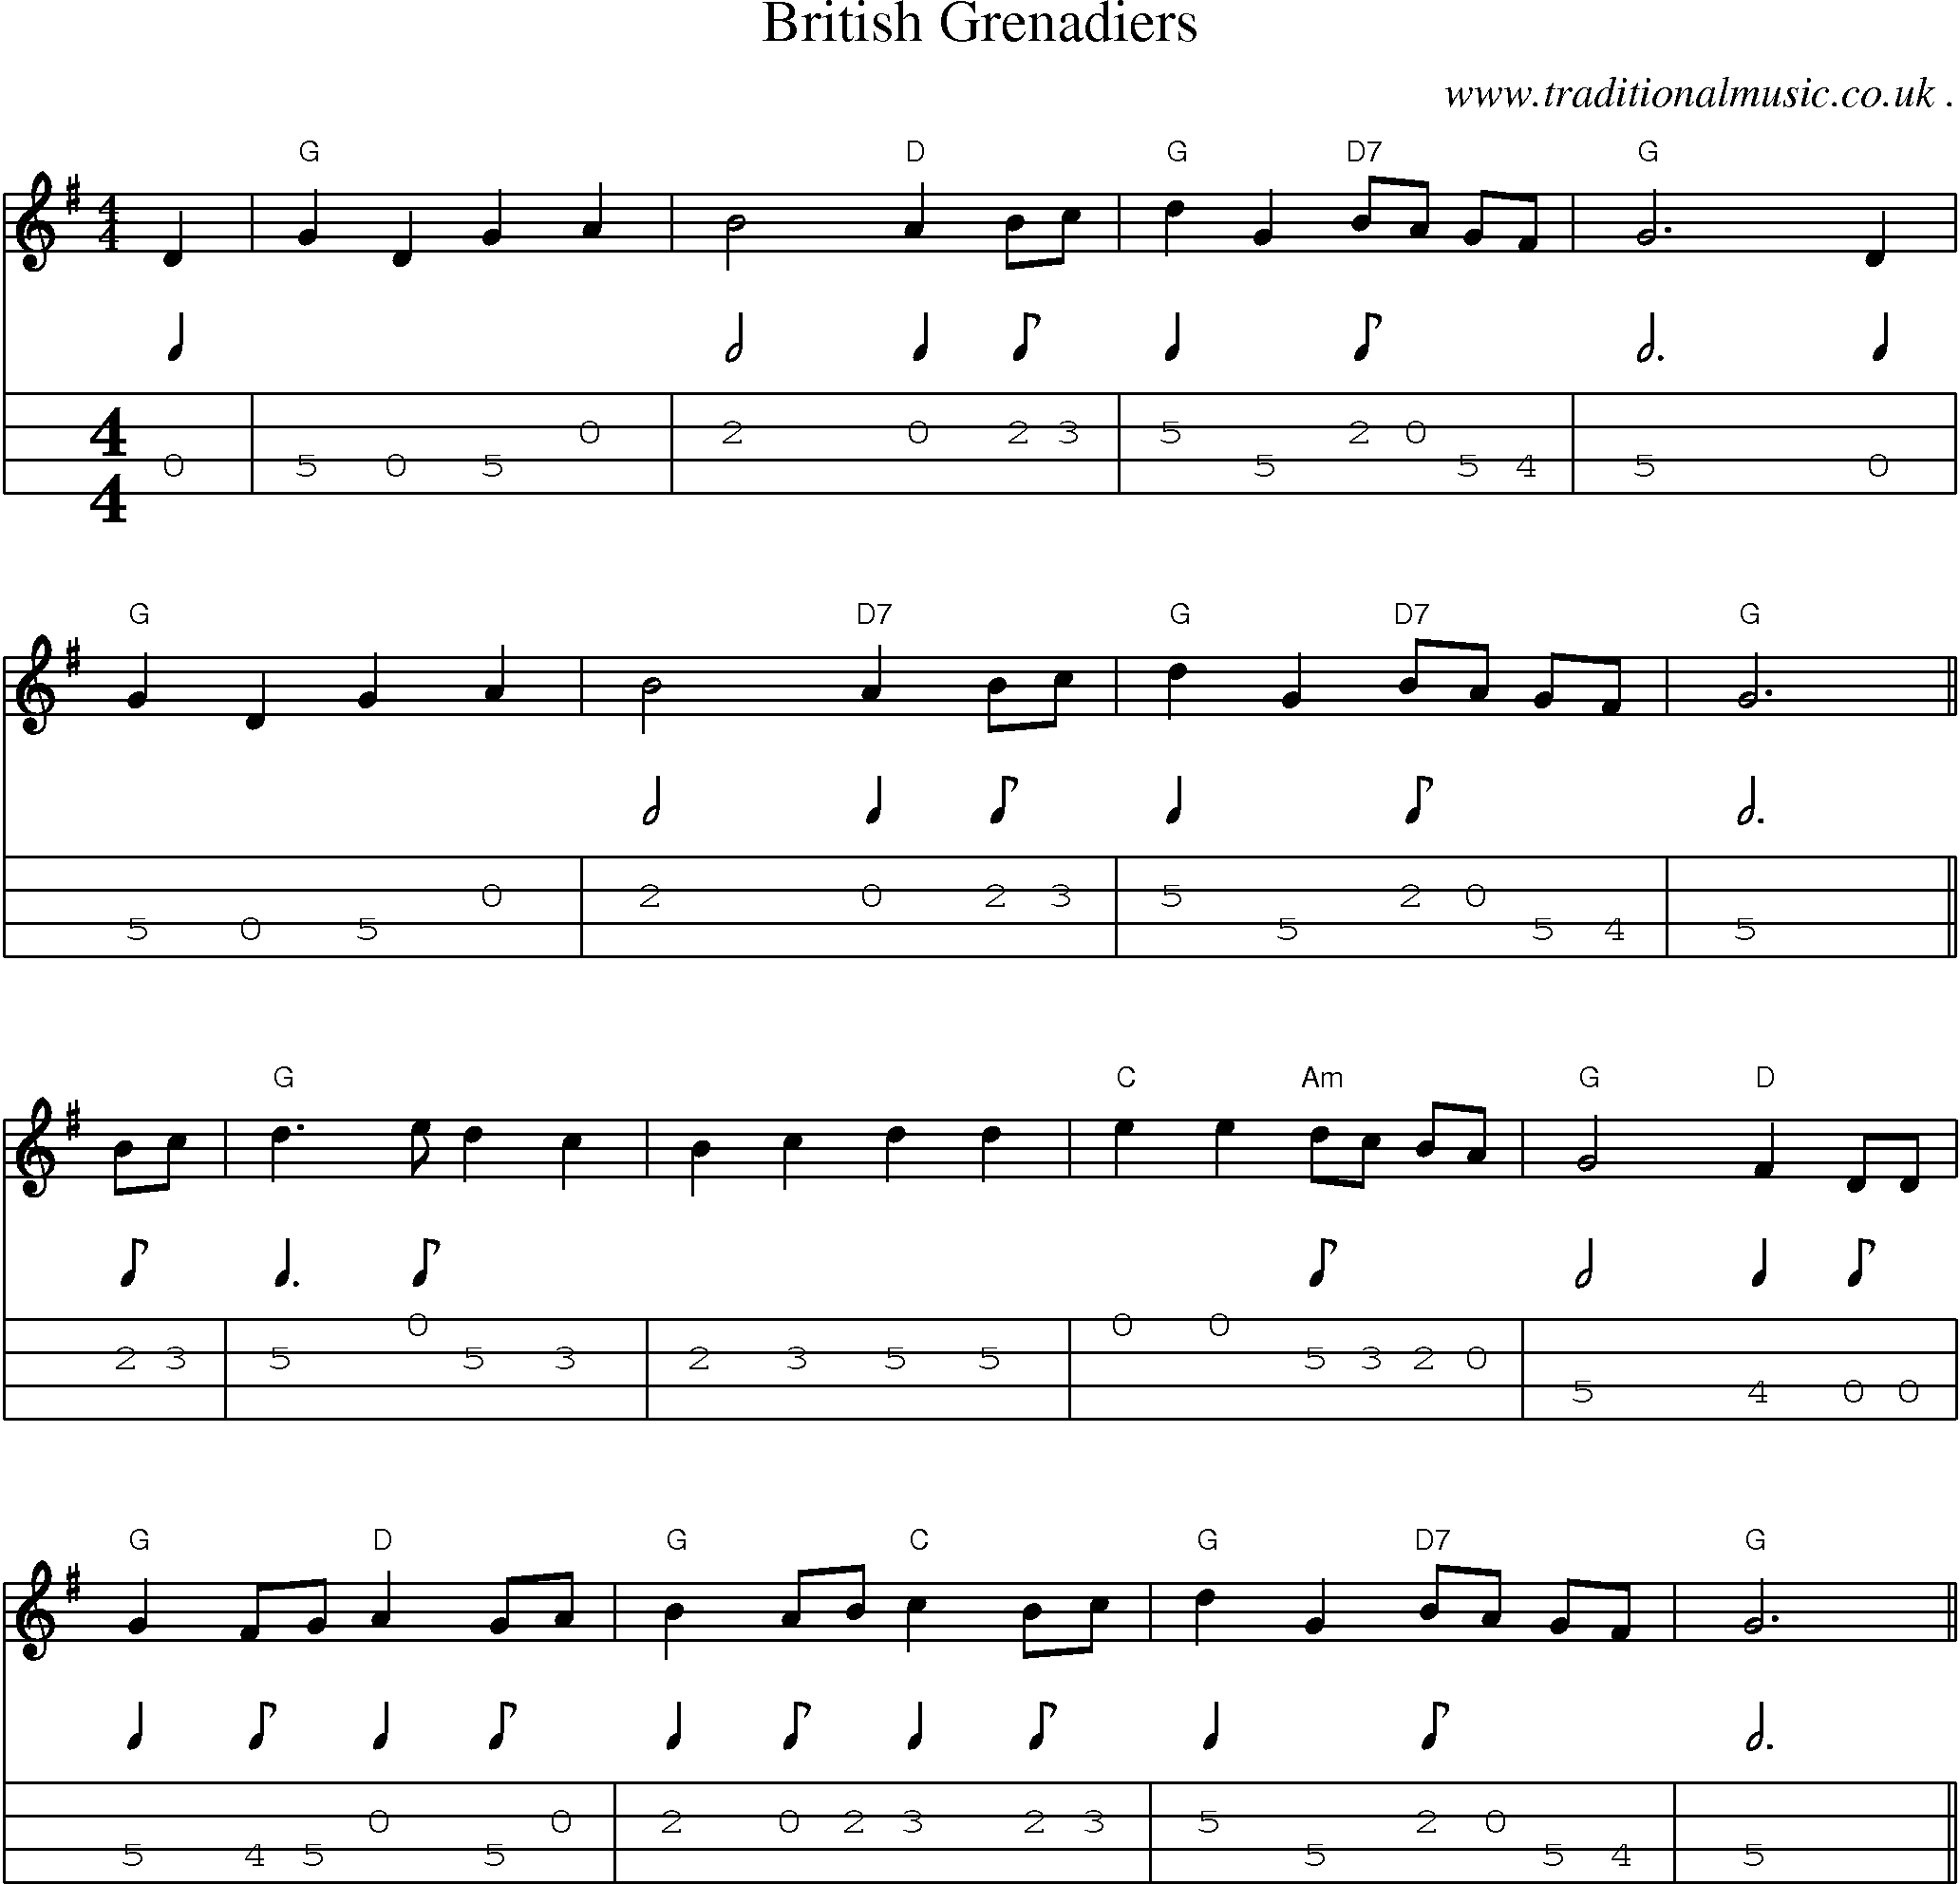 Music Score and Guitar Tabs for British Grenadiers